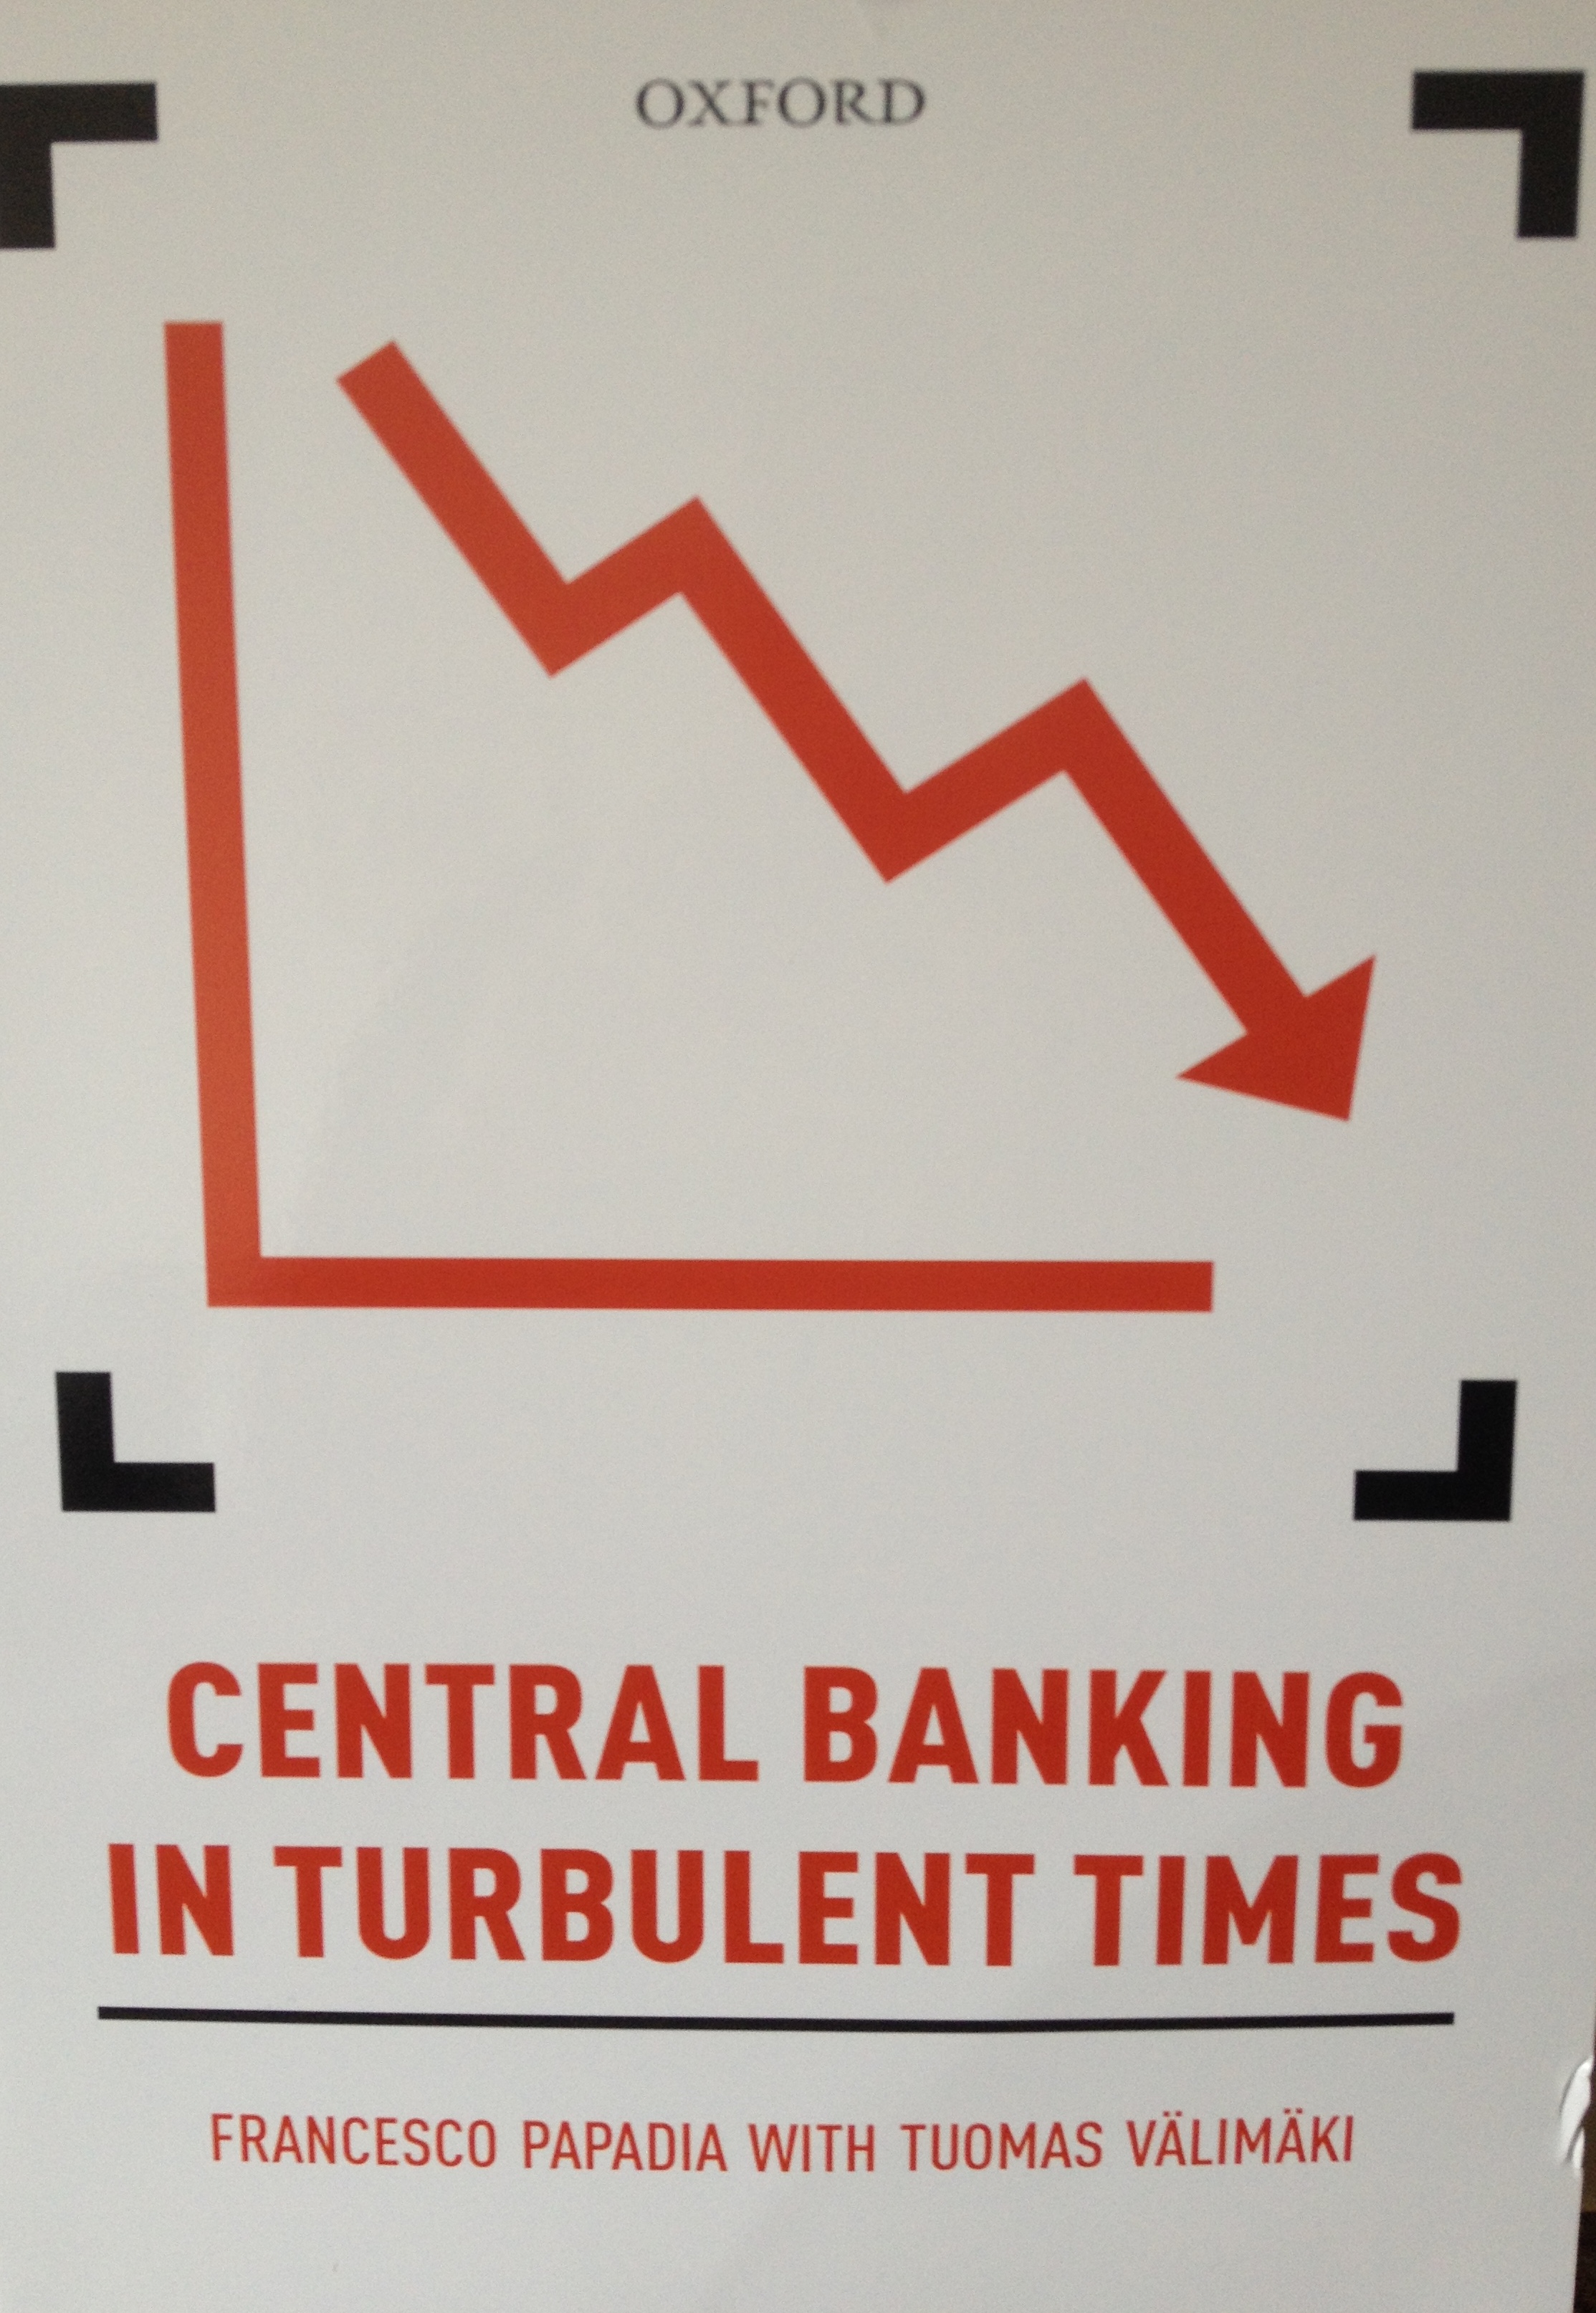 CENTRAL BANKING IN TURBULENT TIMES